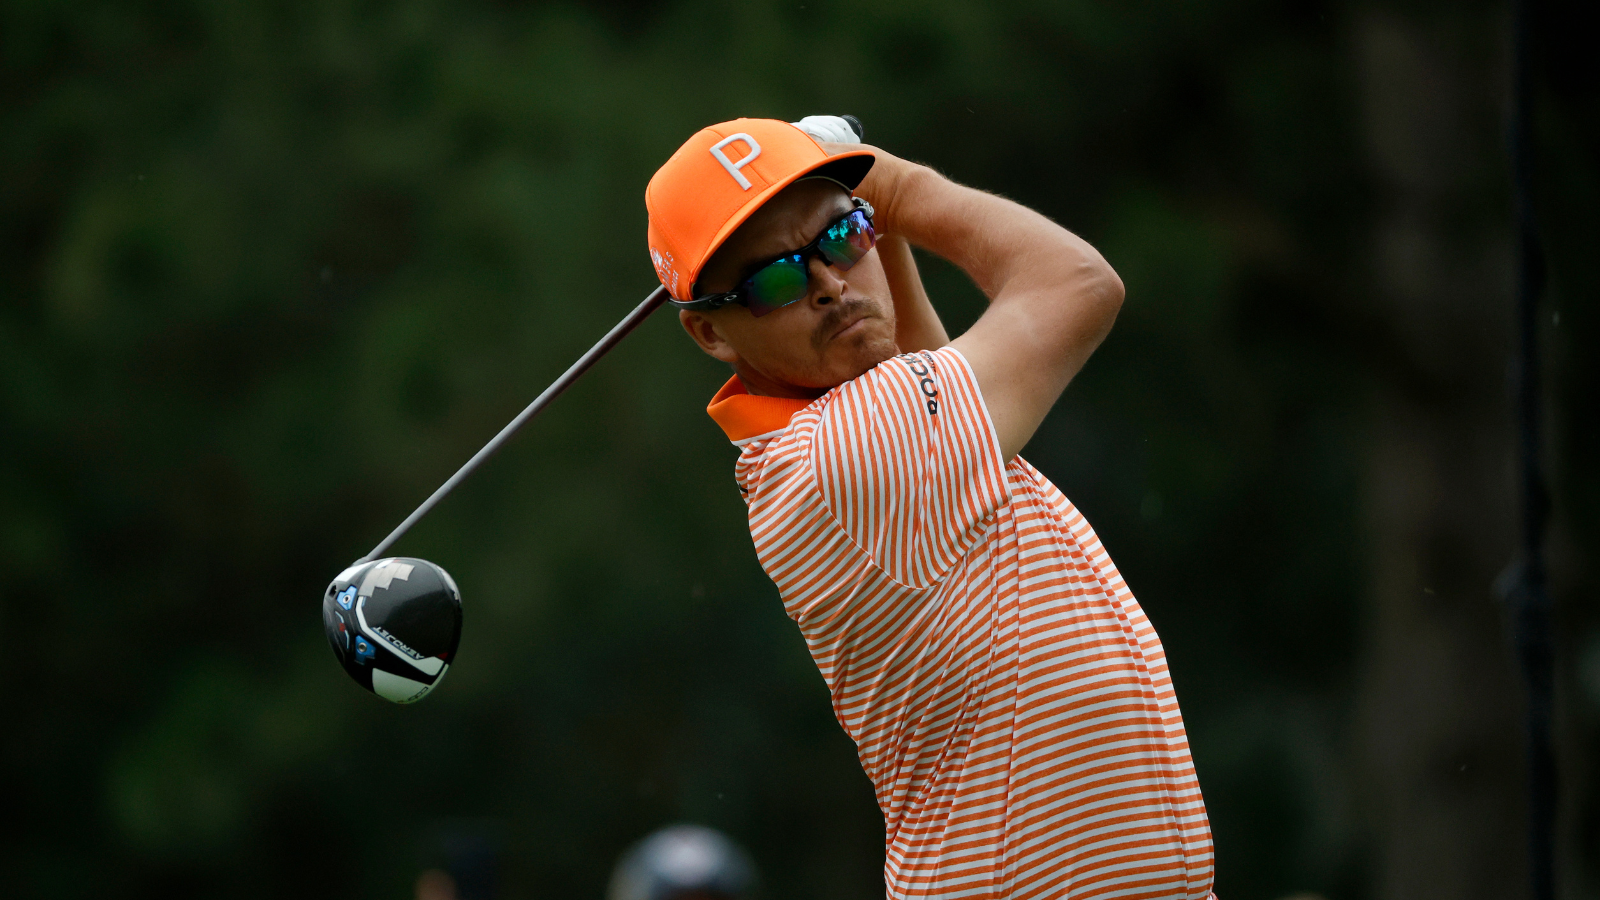 Rickie Fowler playing at the Rocket Mortgage Classic earlier in July